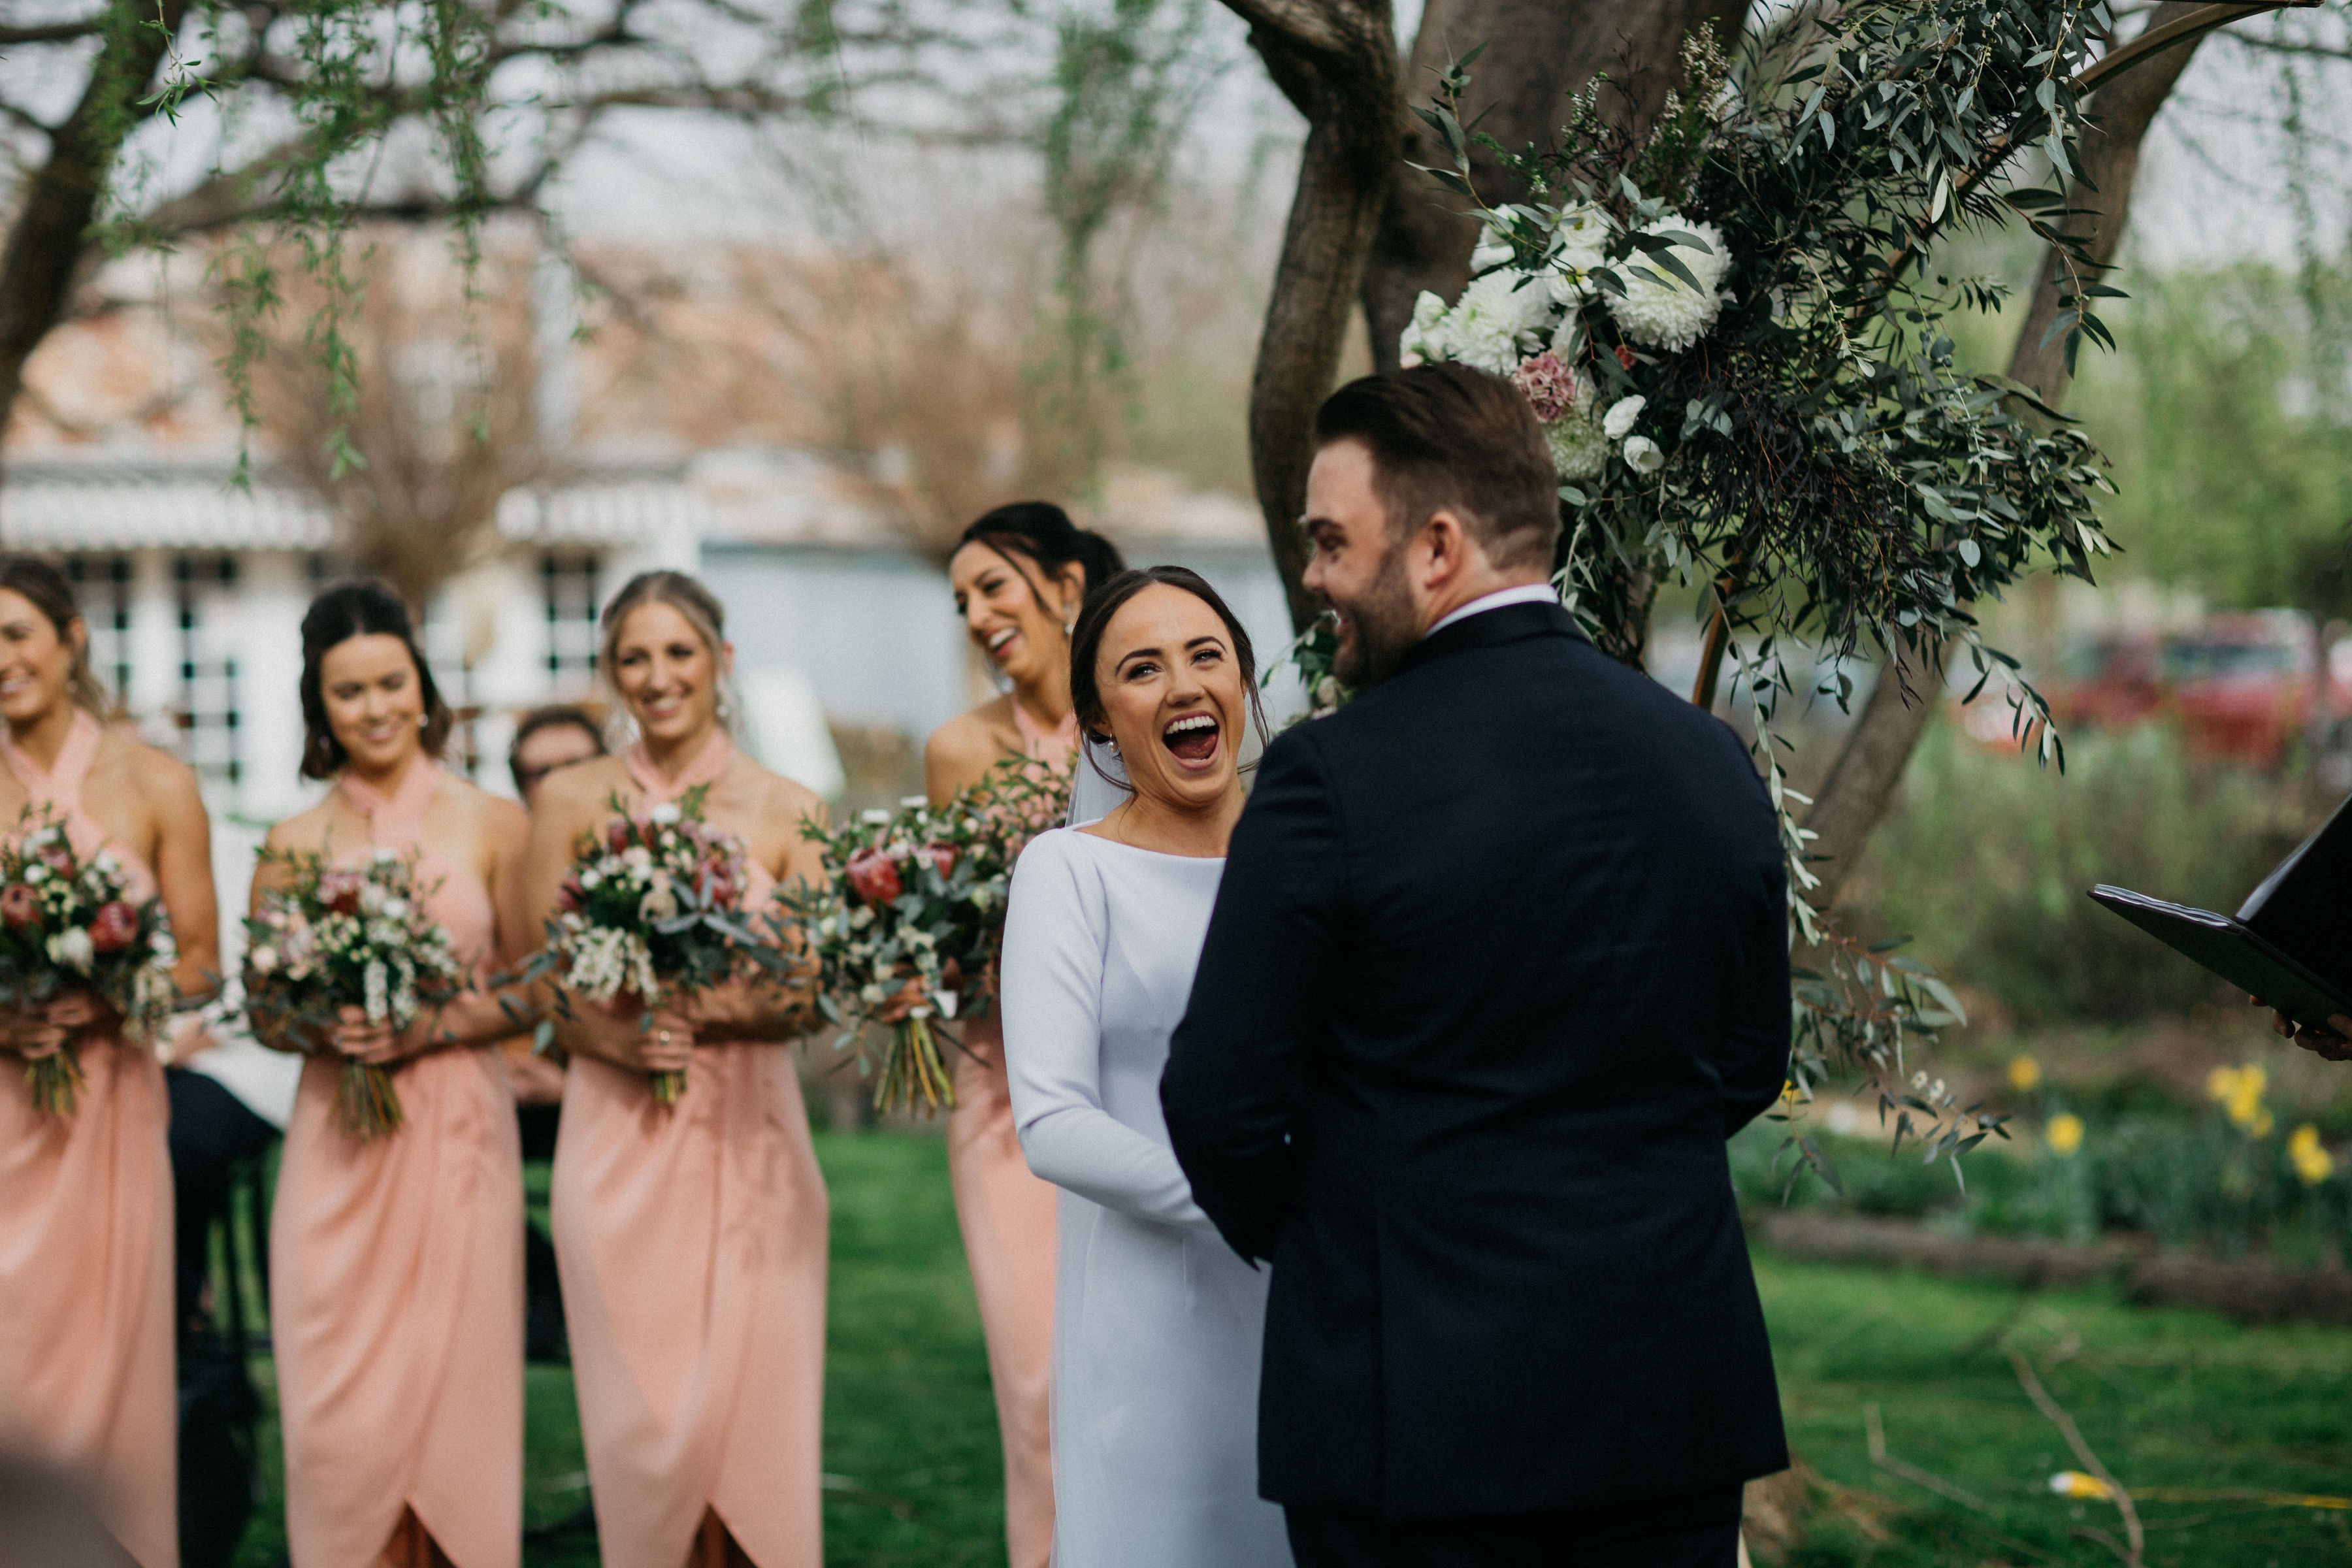 fun wedding ceremony captured by who shot the photographertured by captured by who